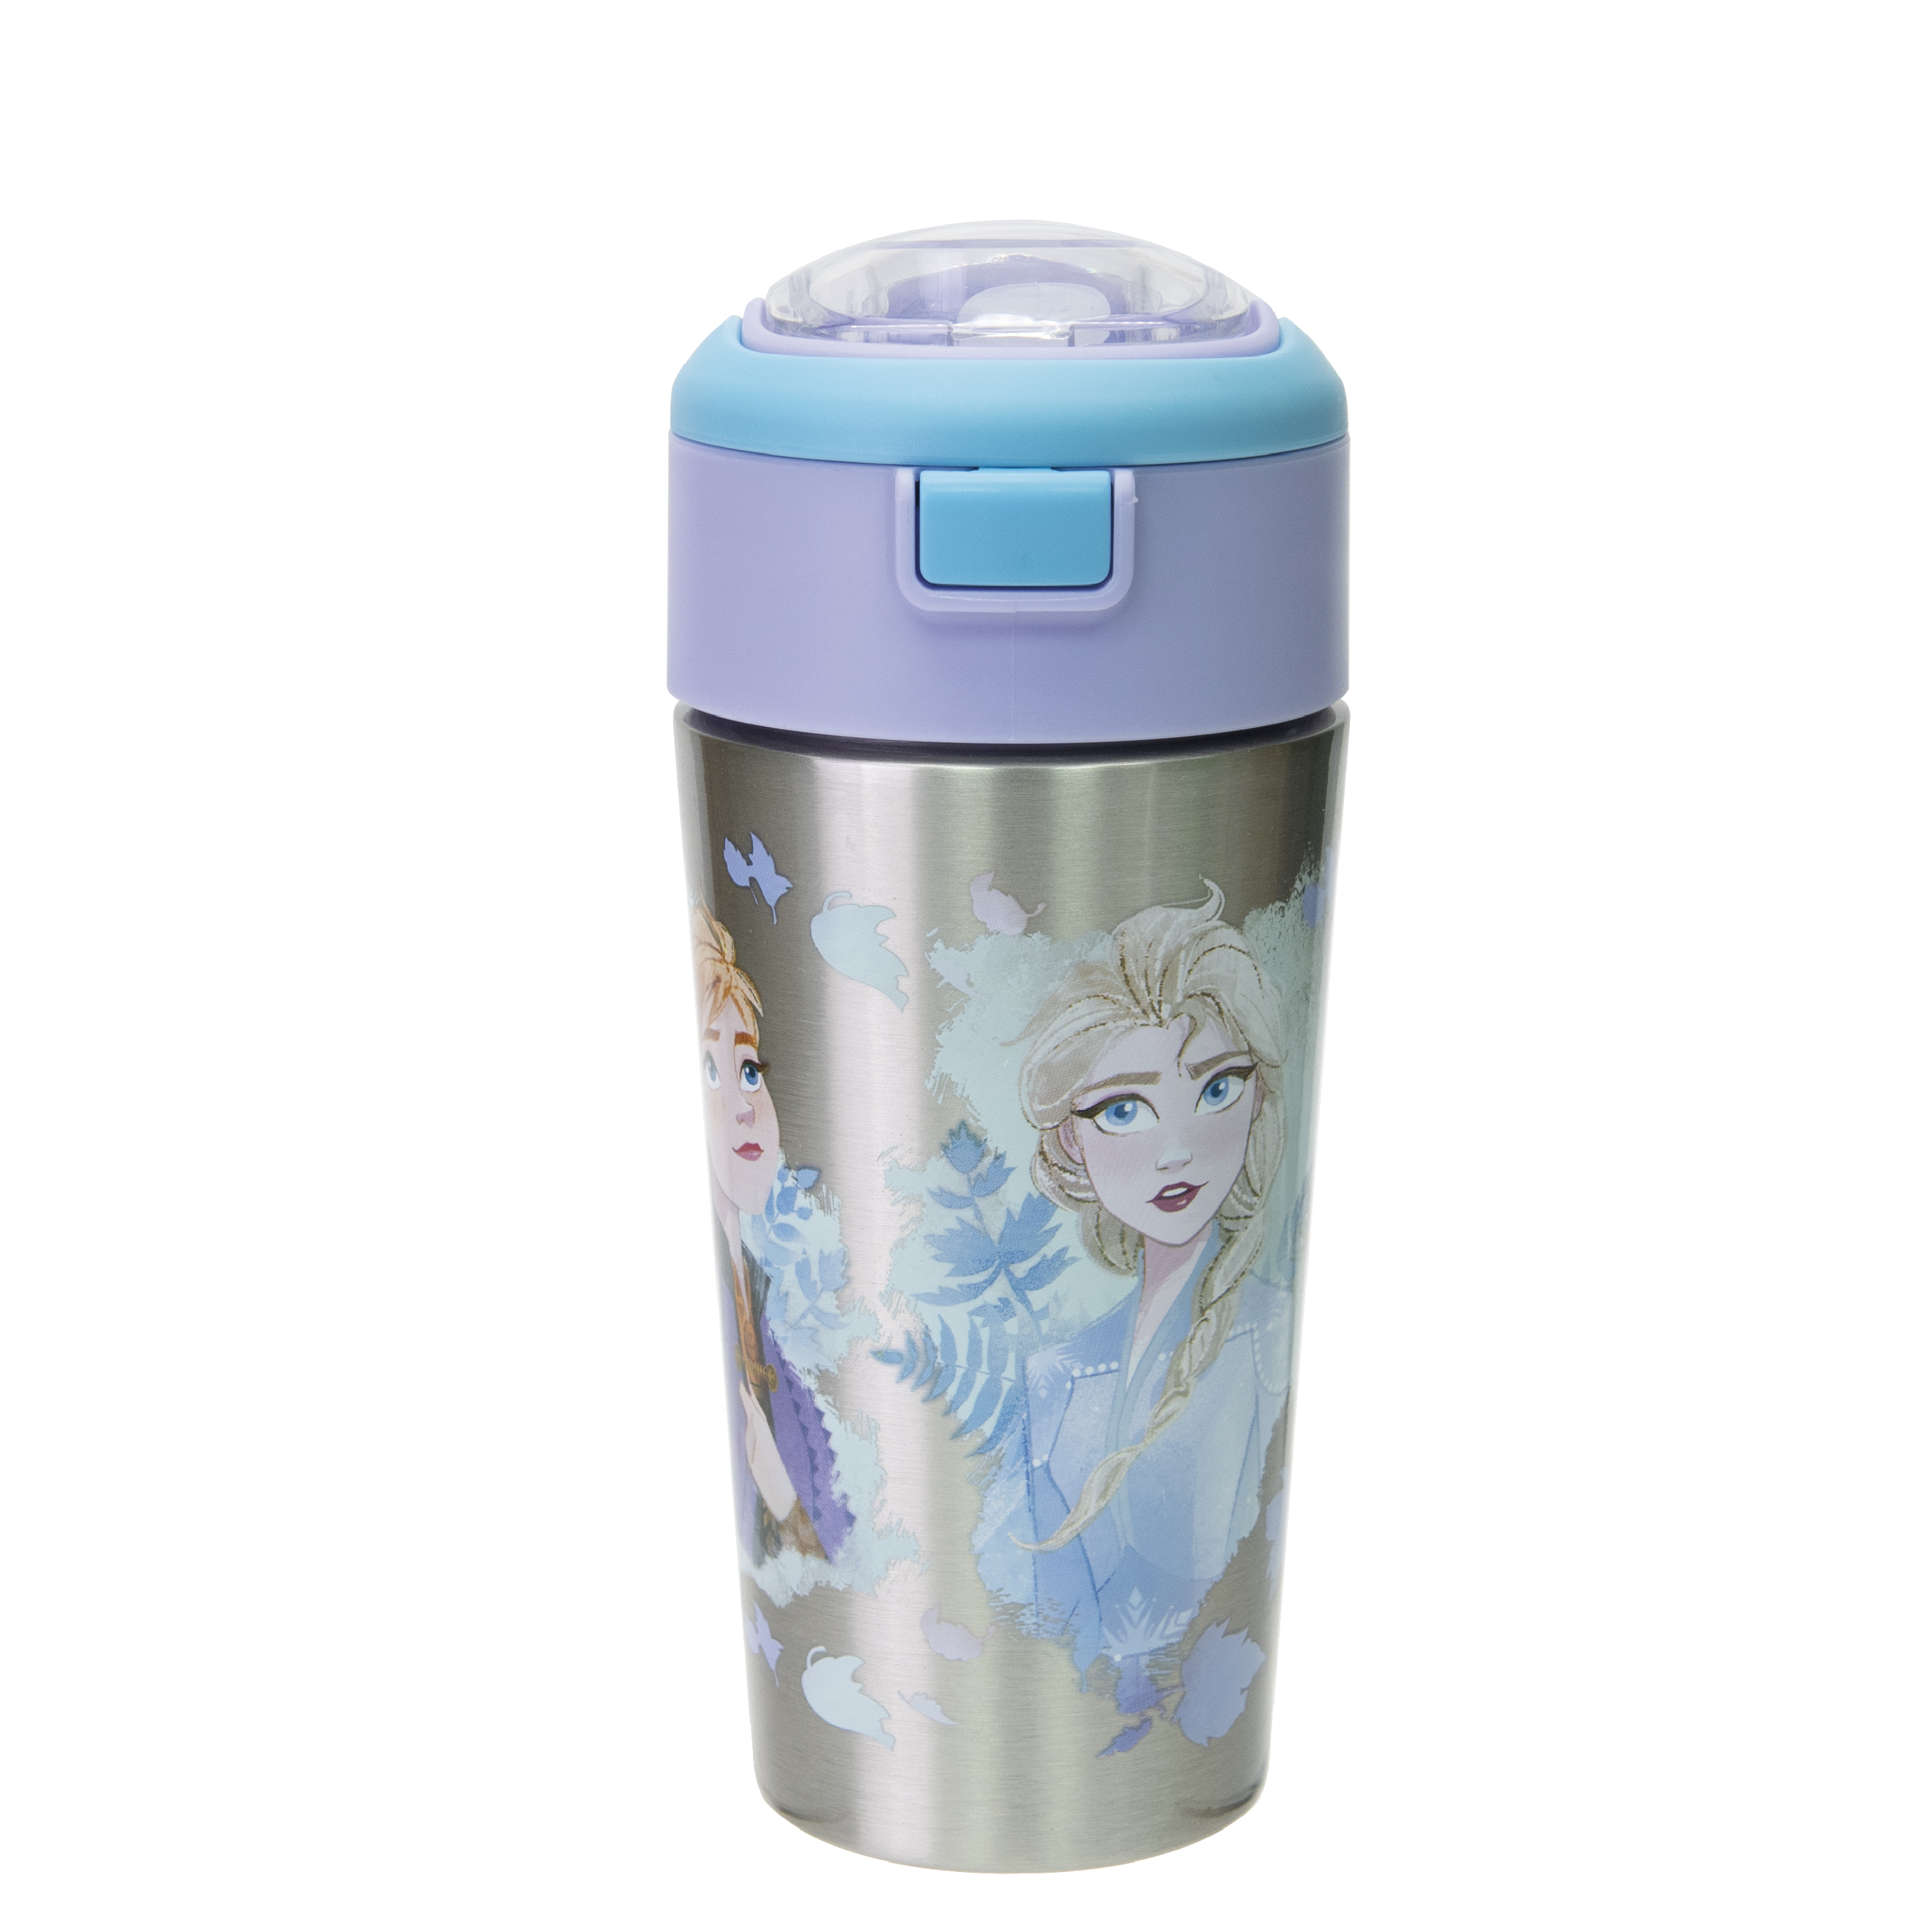 Disney Frozen 2 Movie 12 ounce Vacuum Insulated Reusable Stainless Steel Water Bottle, Anna, Elsa & Olaf slideshow image 1